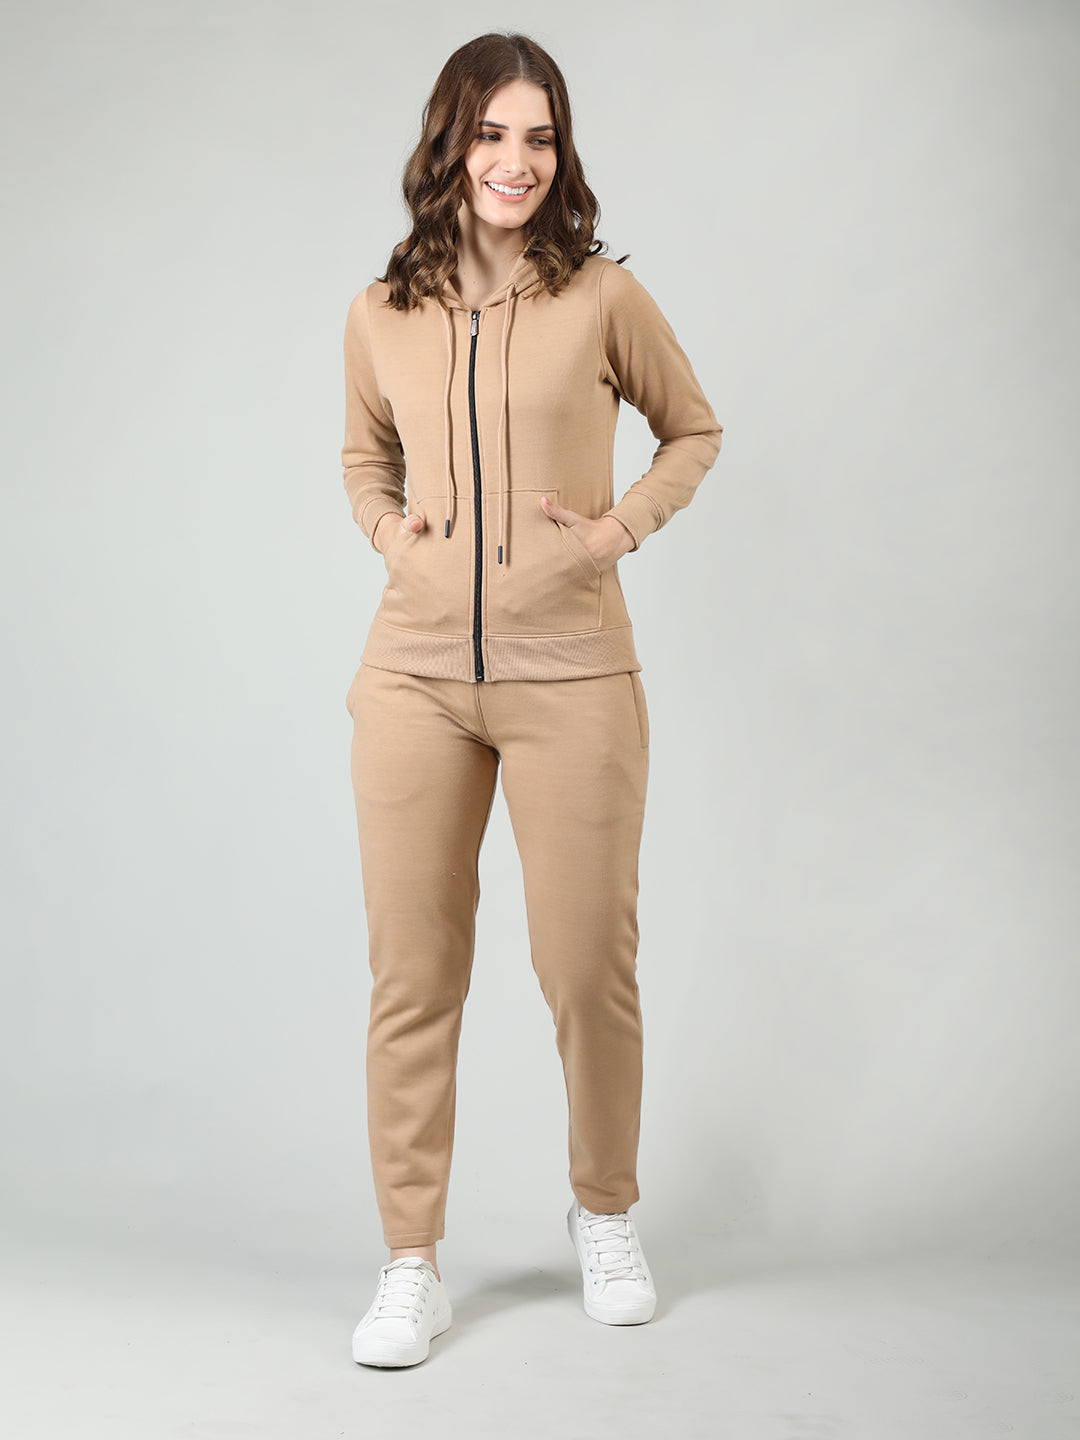 Girls Clothing | Puma track Suit For girls | Freeup